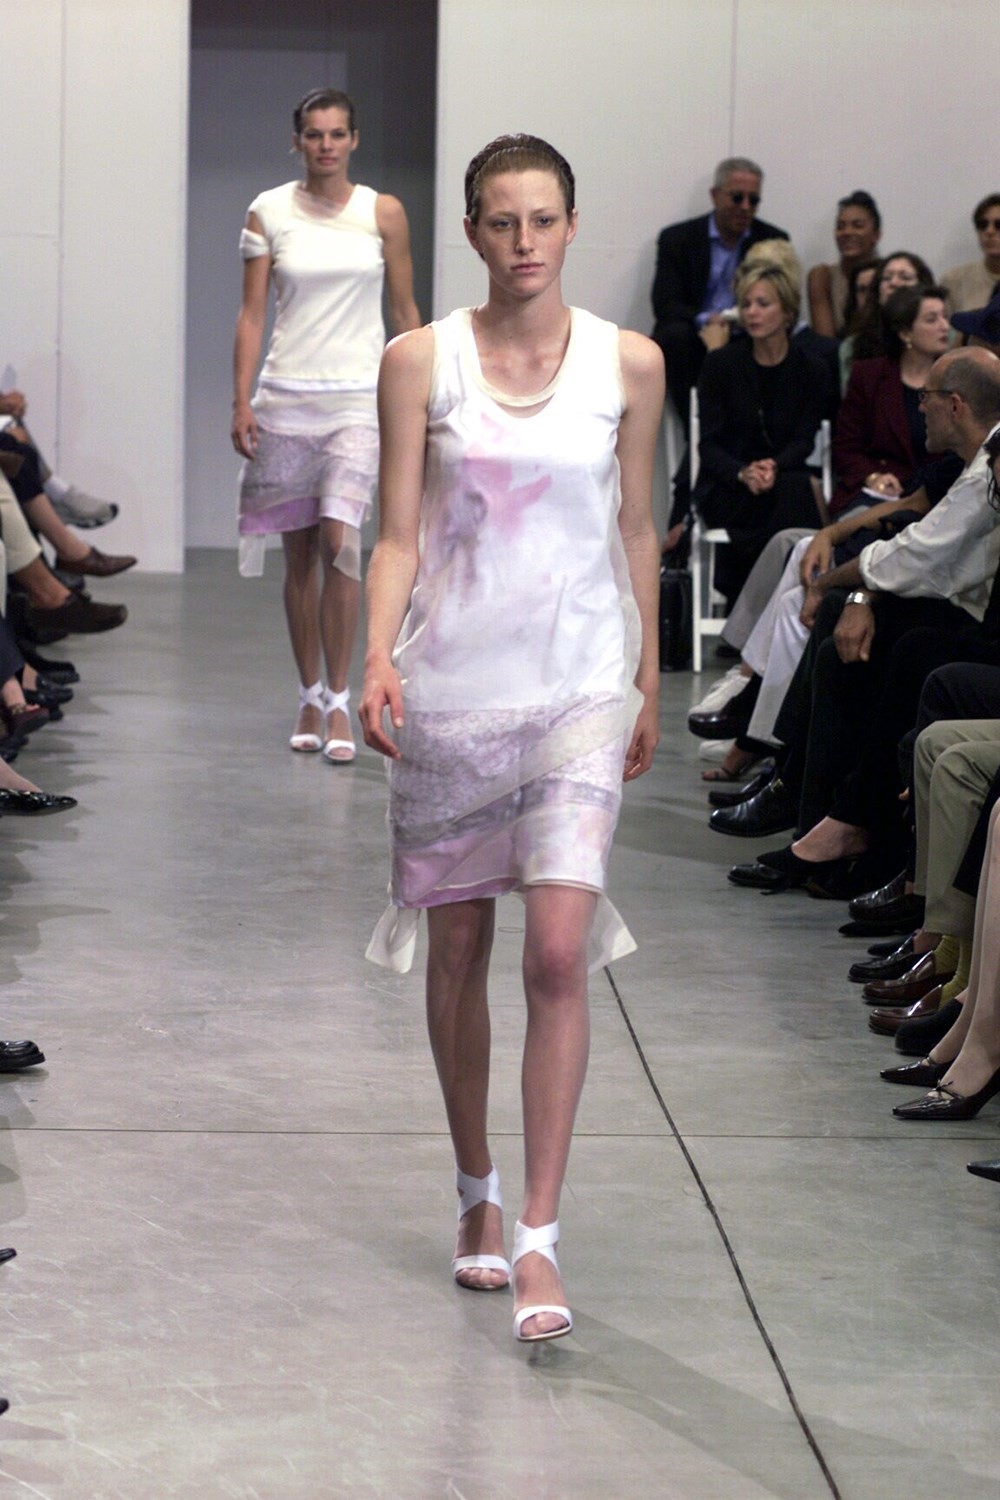 Capturing the Zeitgeist of Lo-Fi Luxe: Helmut Lang S/S99